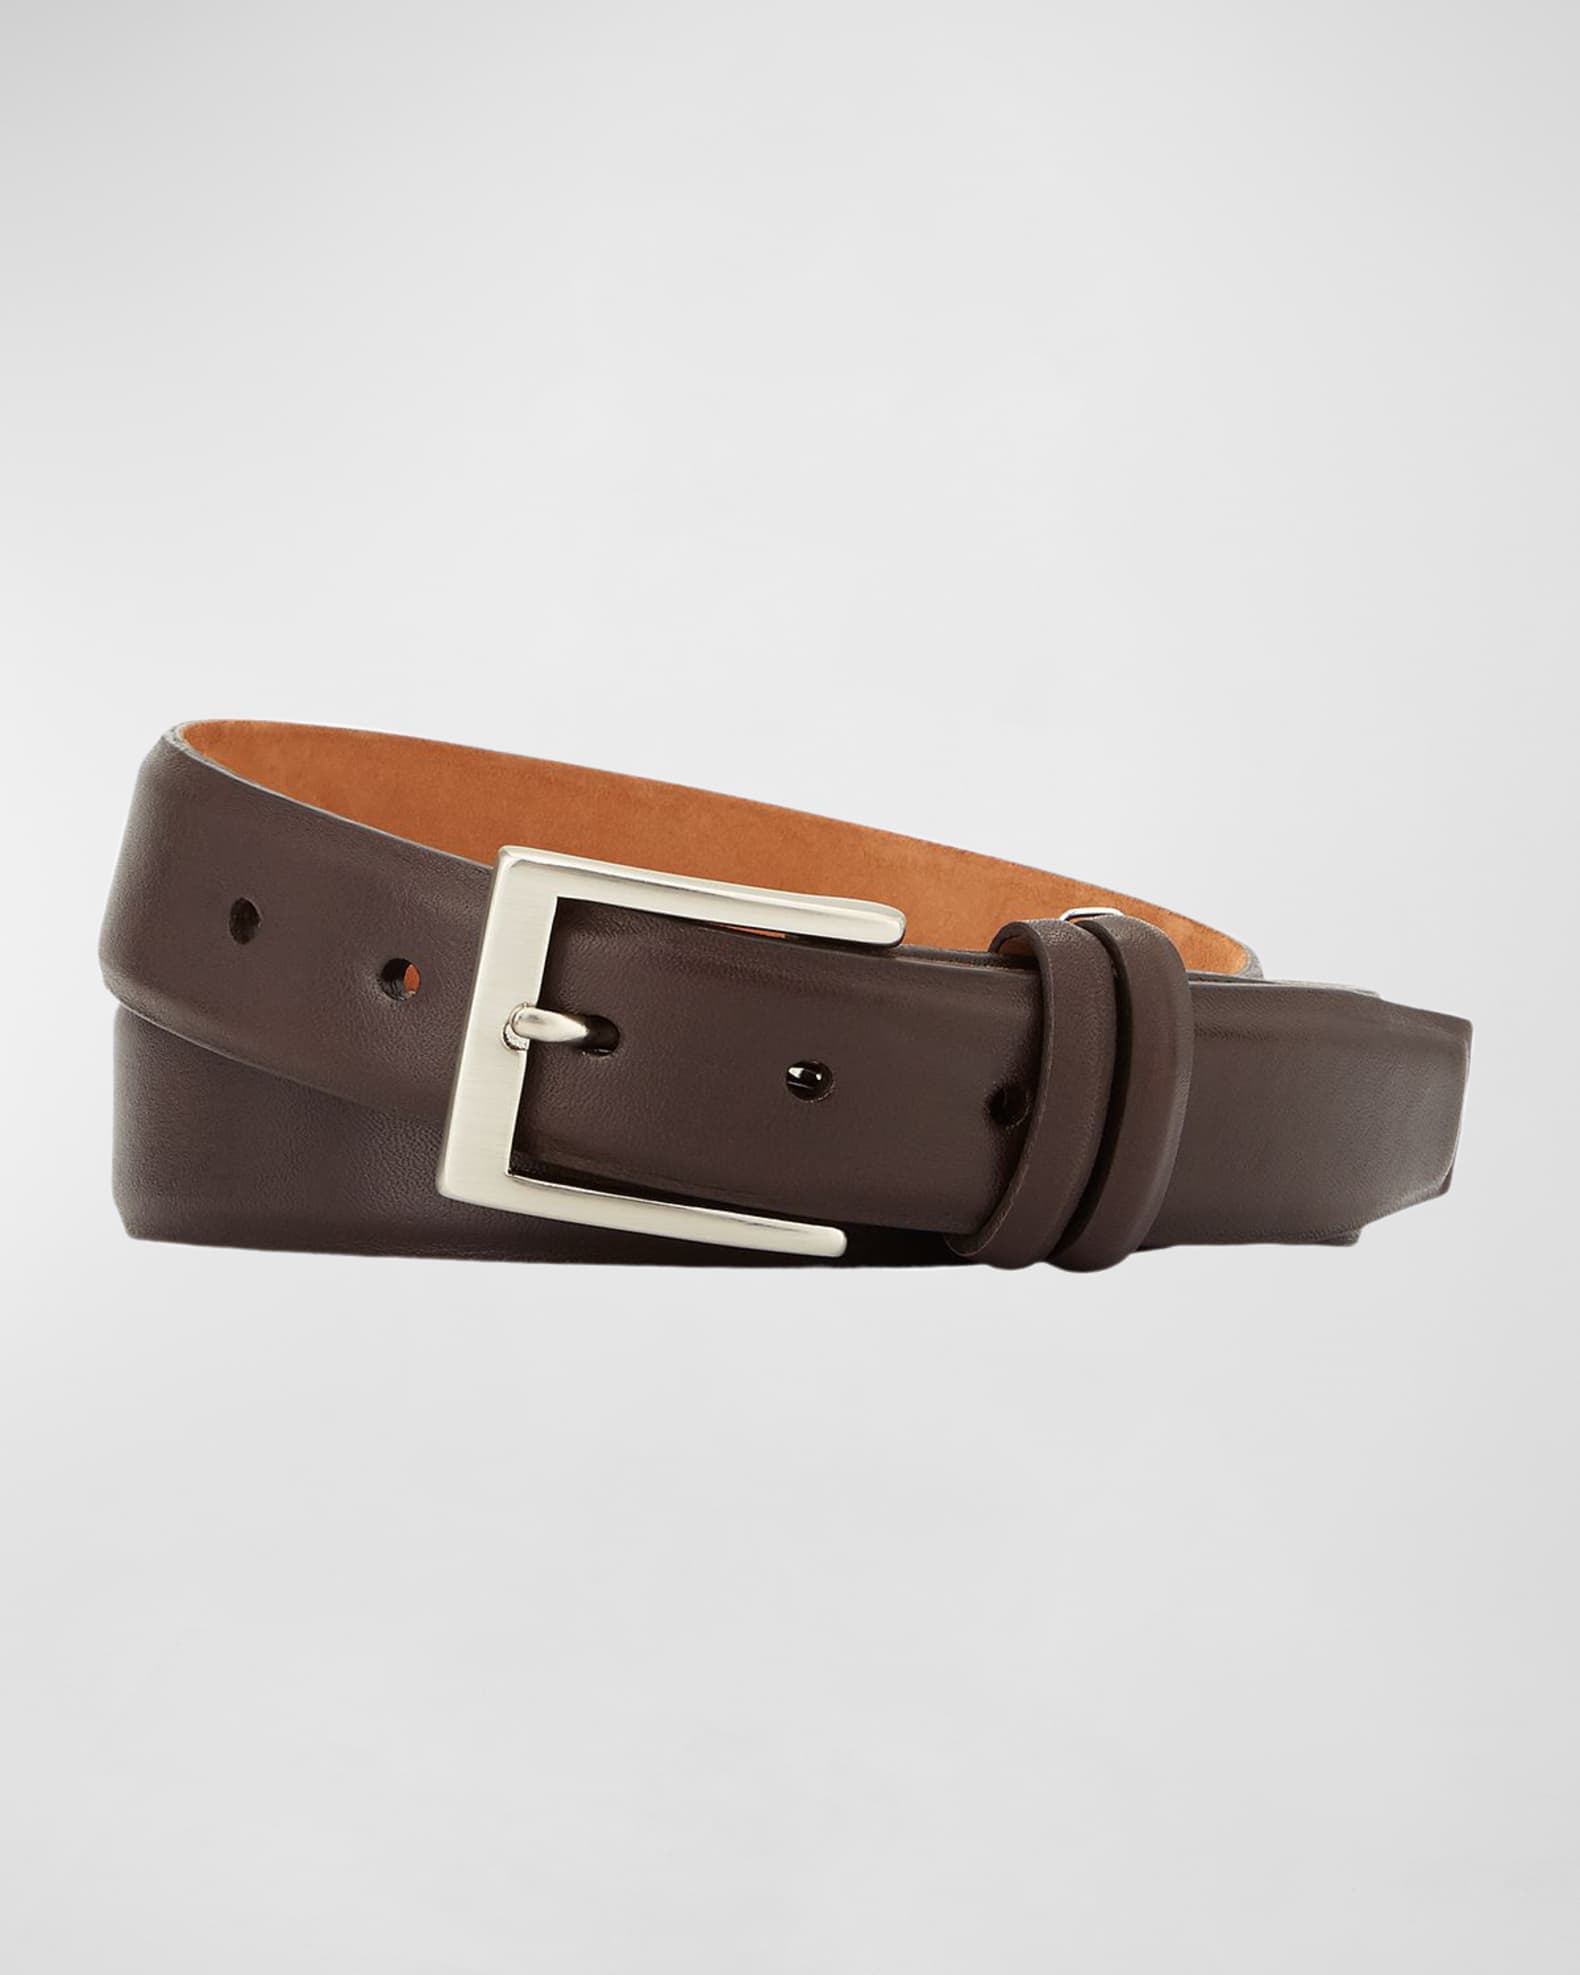 W. Kleinberg Basic Leather Belt with Interchangeable Buckles, Brown ...